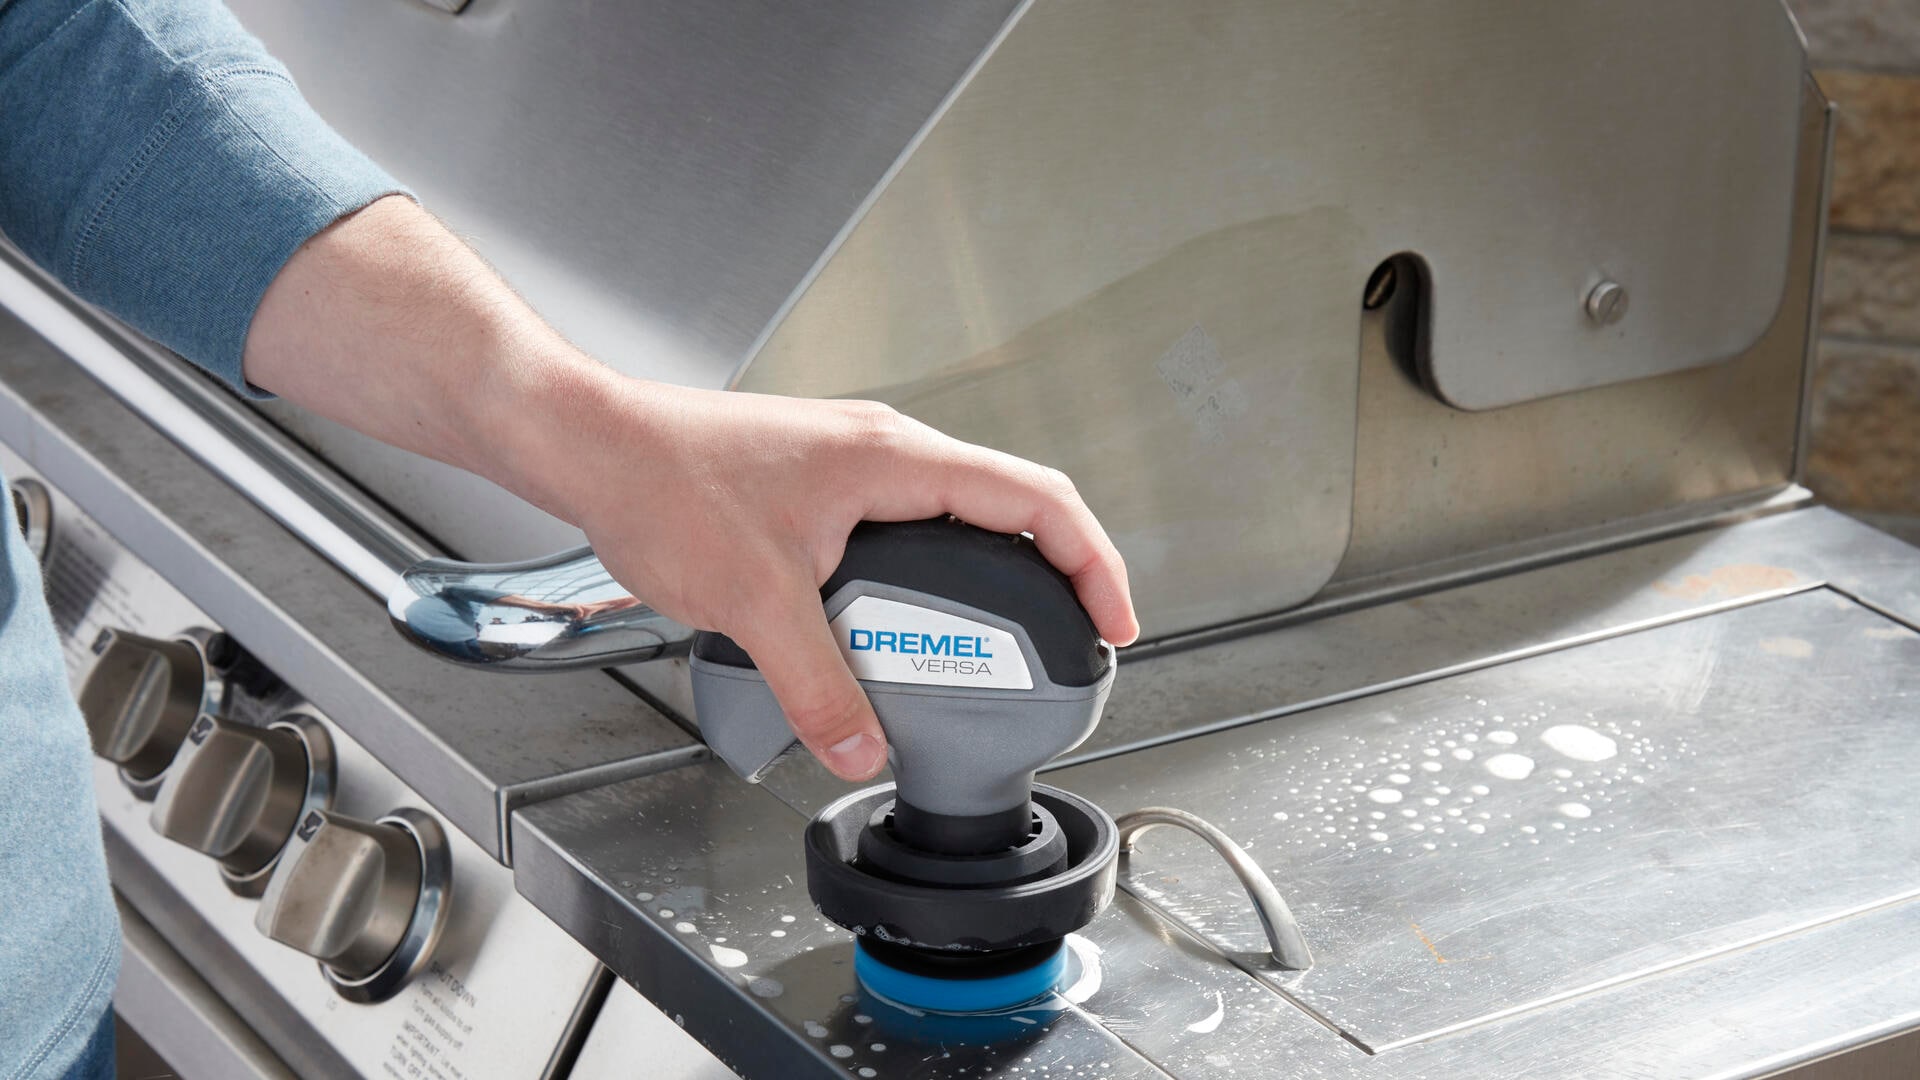 Scrubber Power Power Scrubbers at in Dremel department the Versa